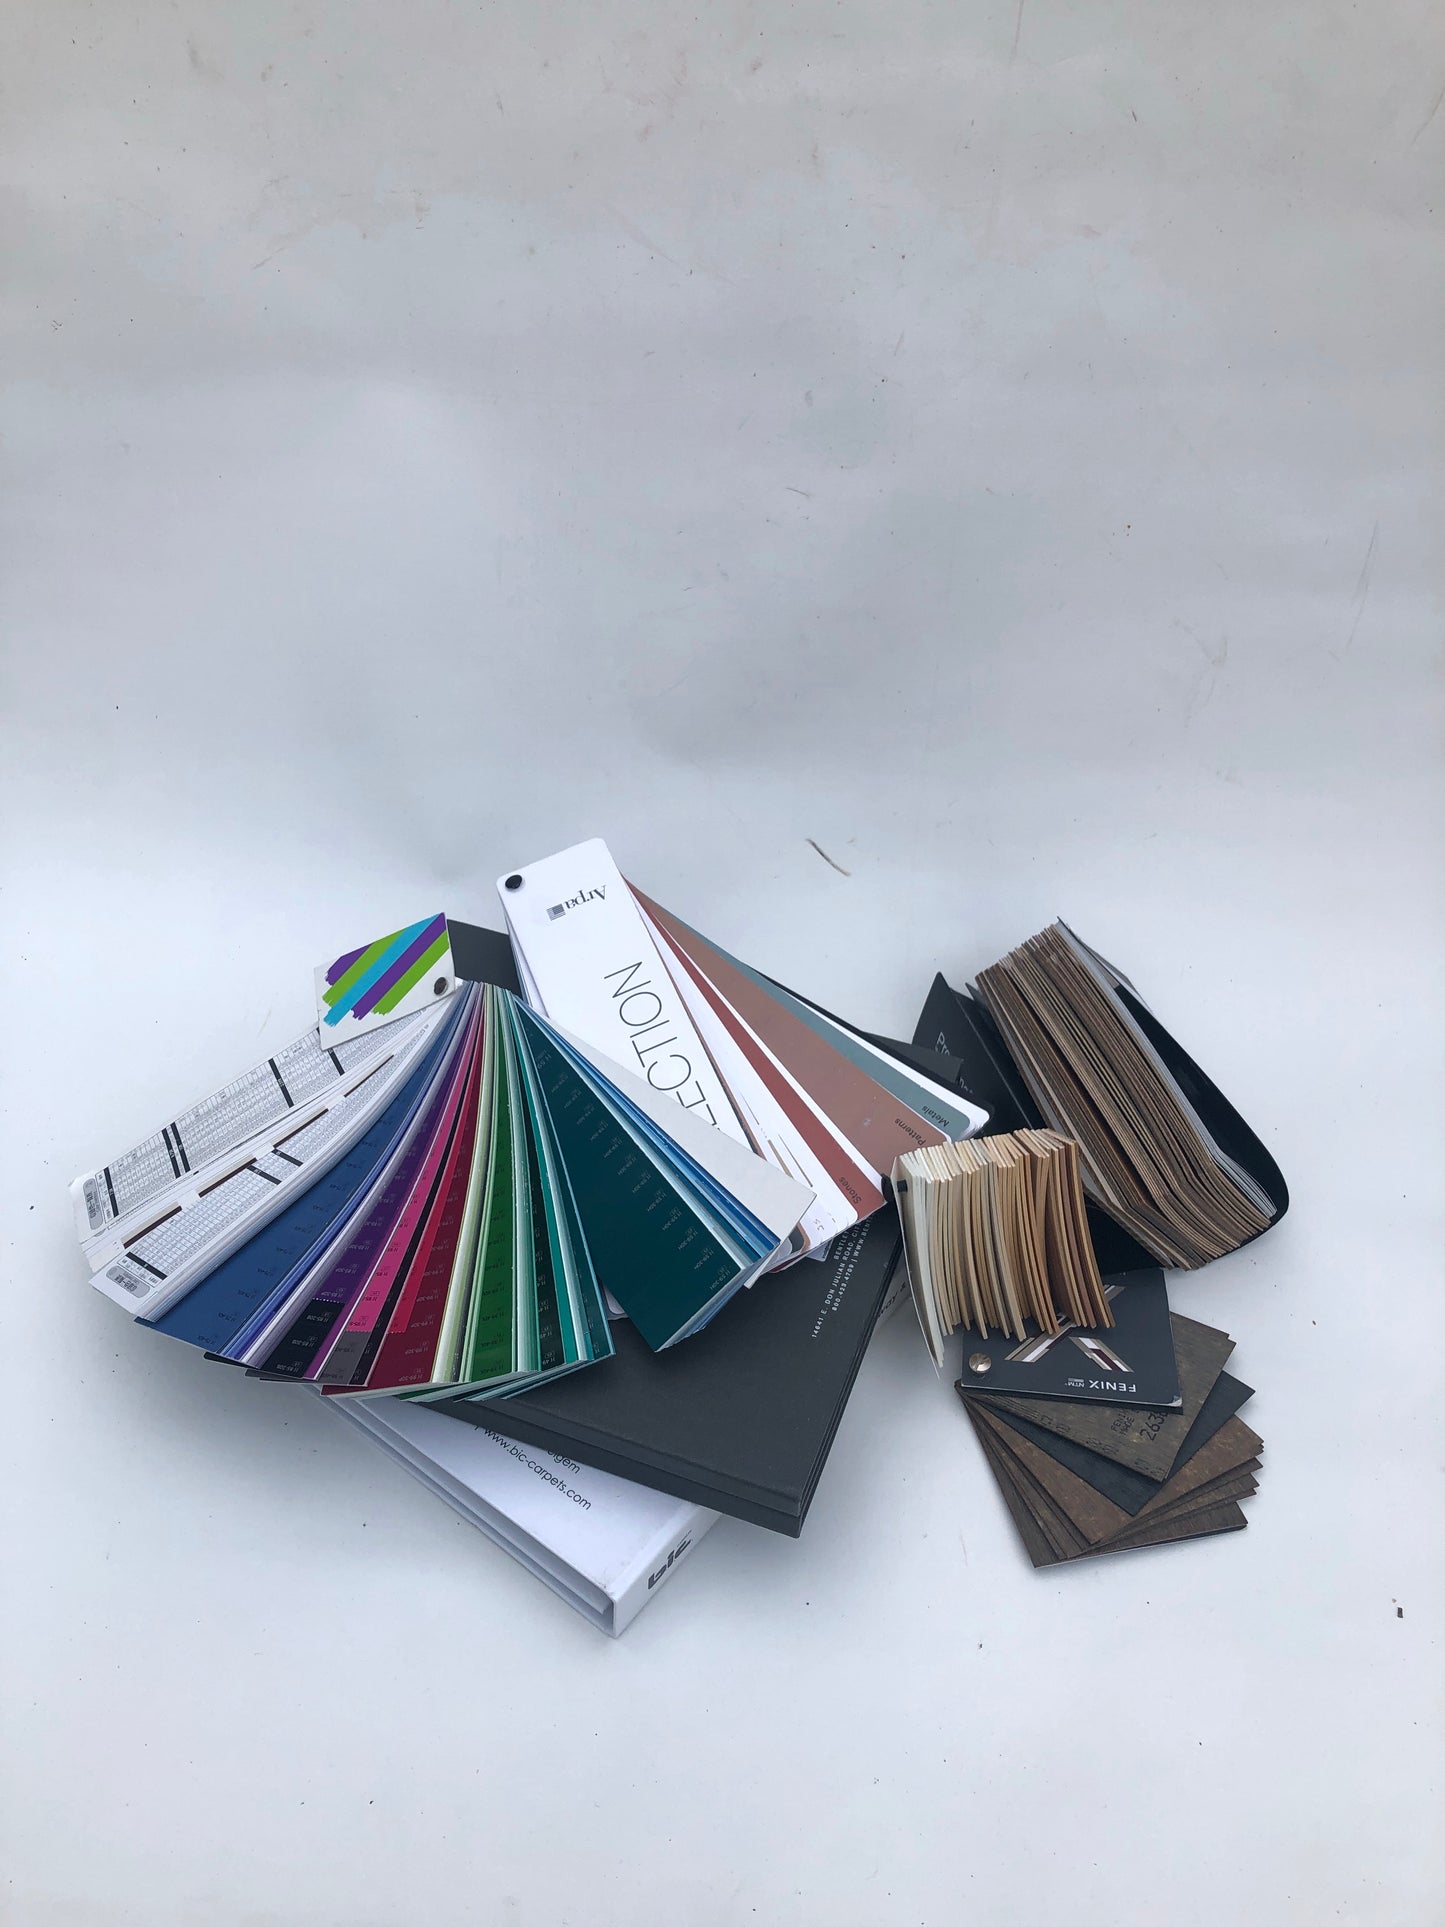 Sample Books of Materials and Colours - 1.5kg